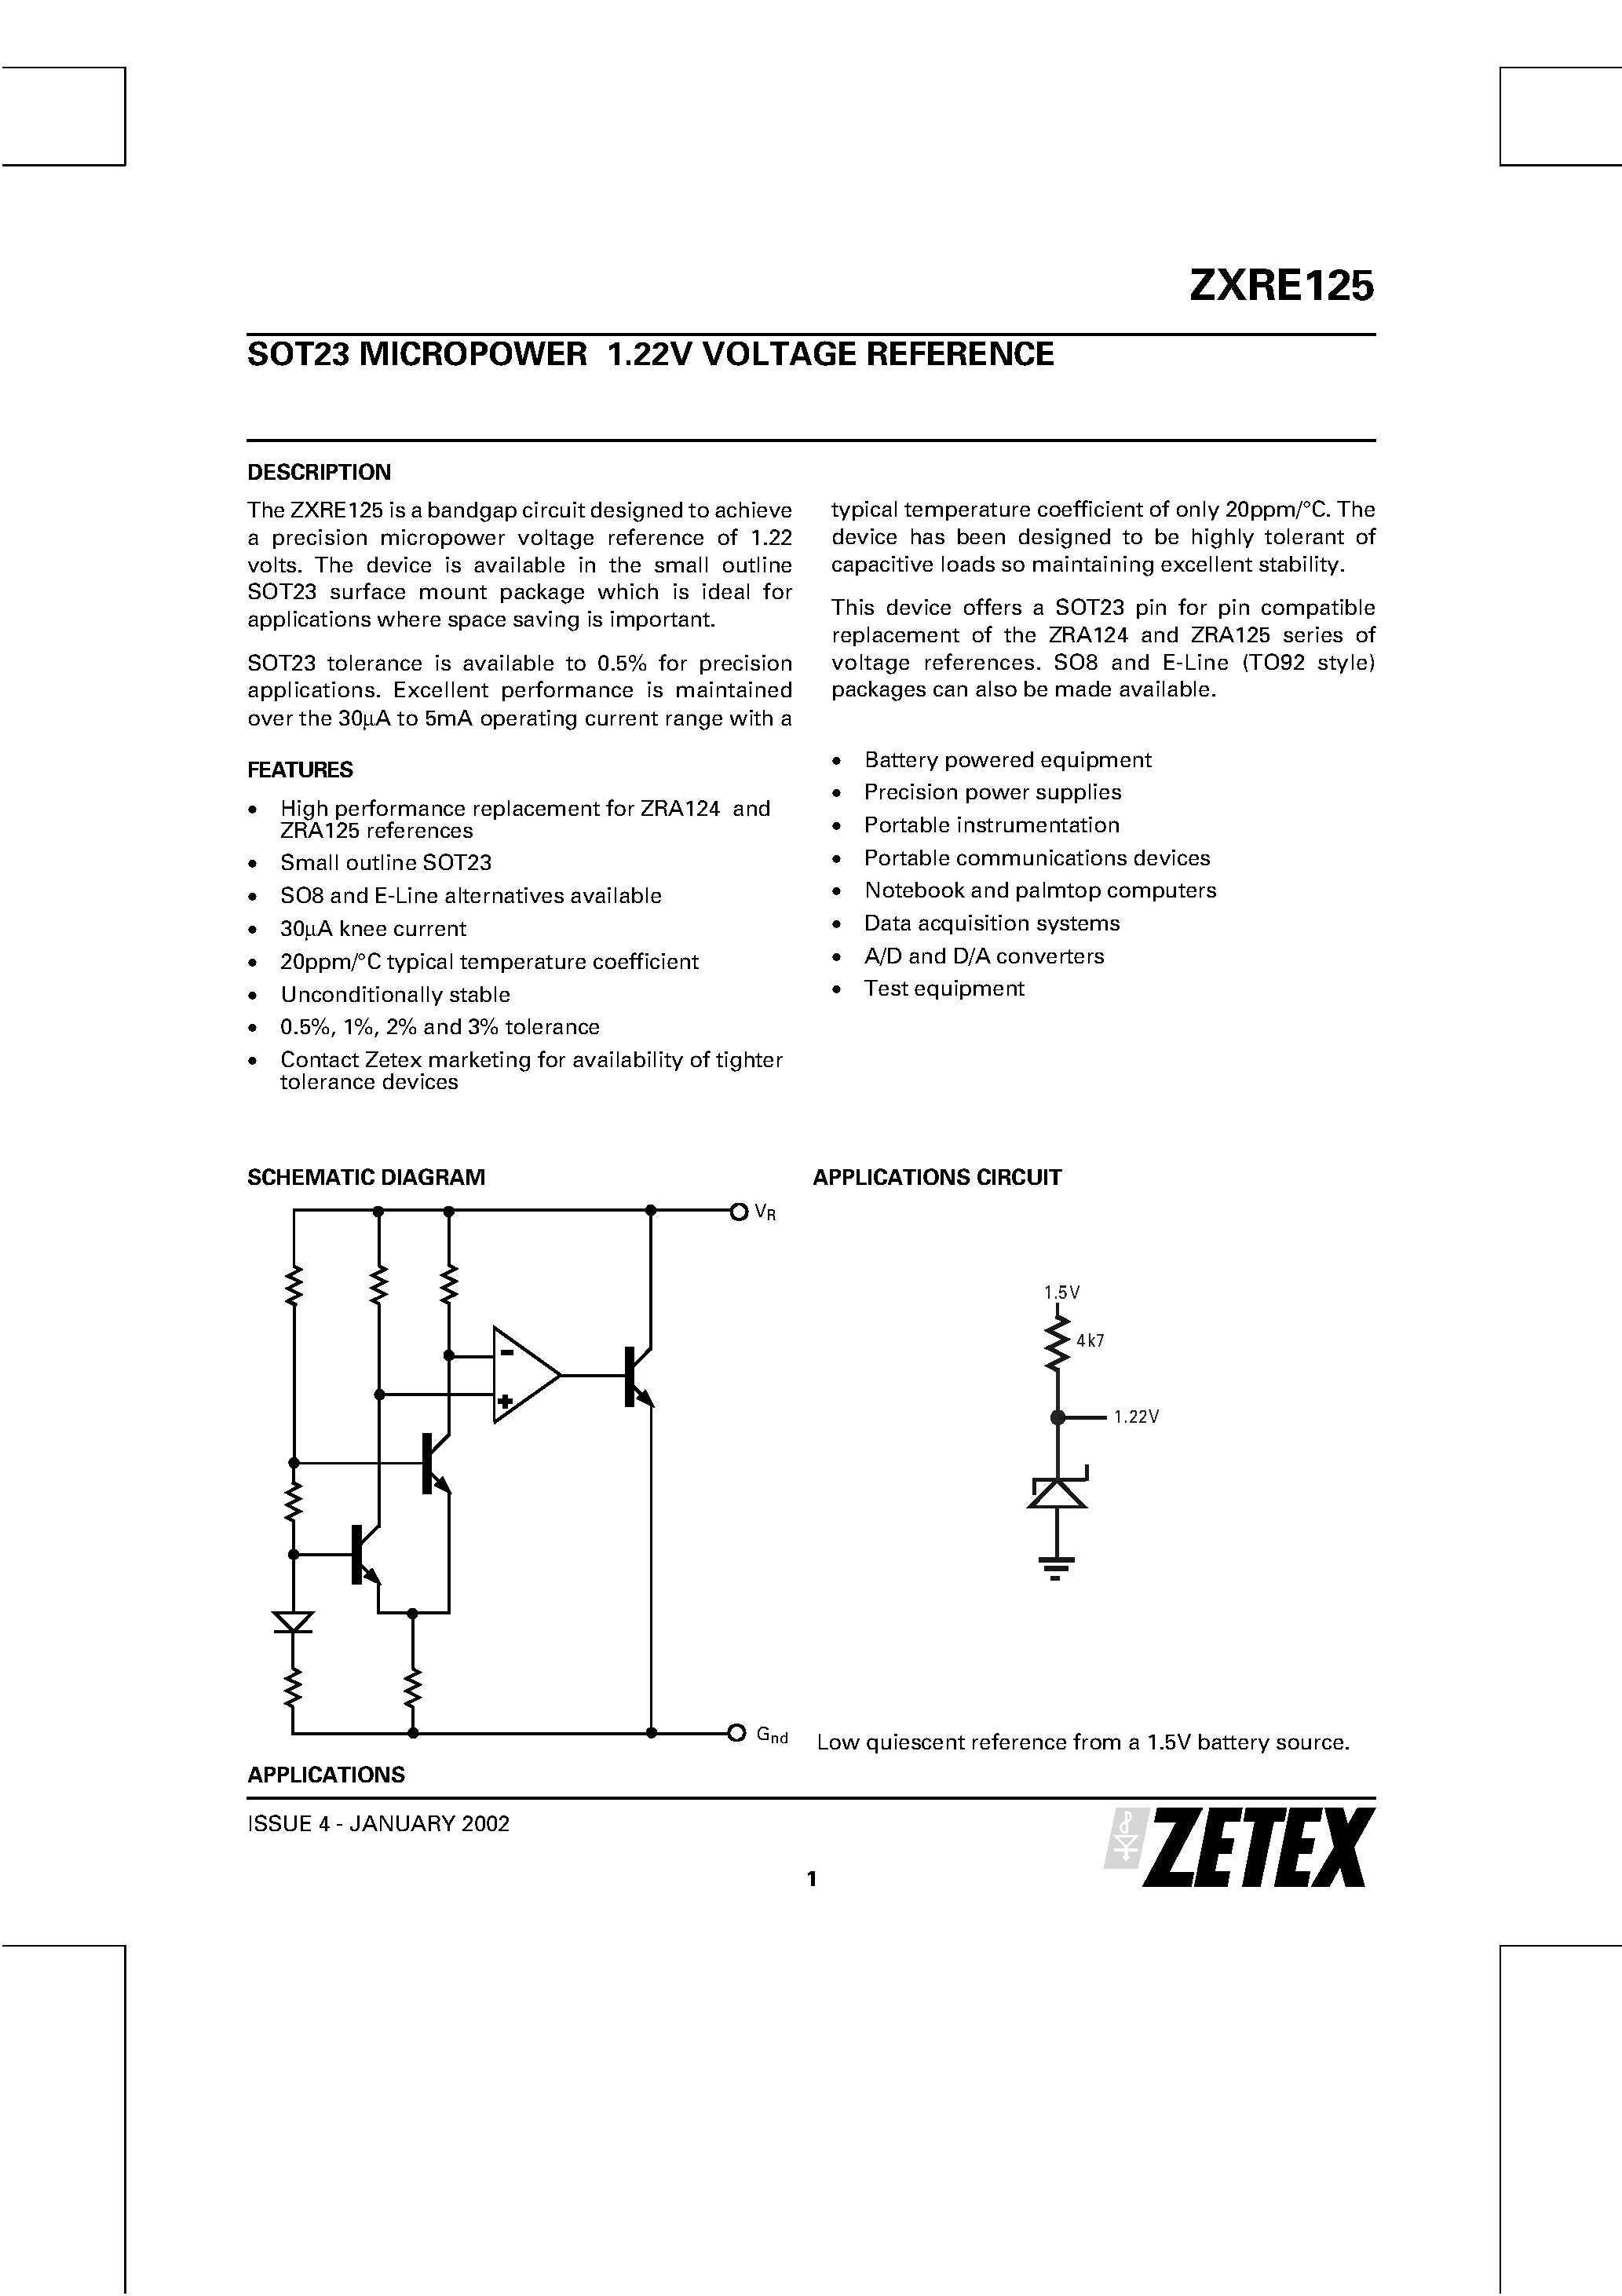 Datasheet ZXRE125 - SOT23 MICROPOWER 1.22V VOLTAGE REFERENCE page 1